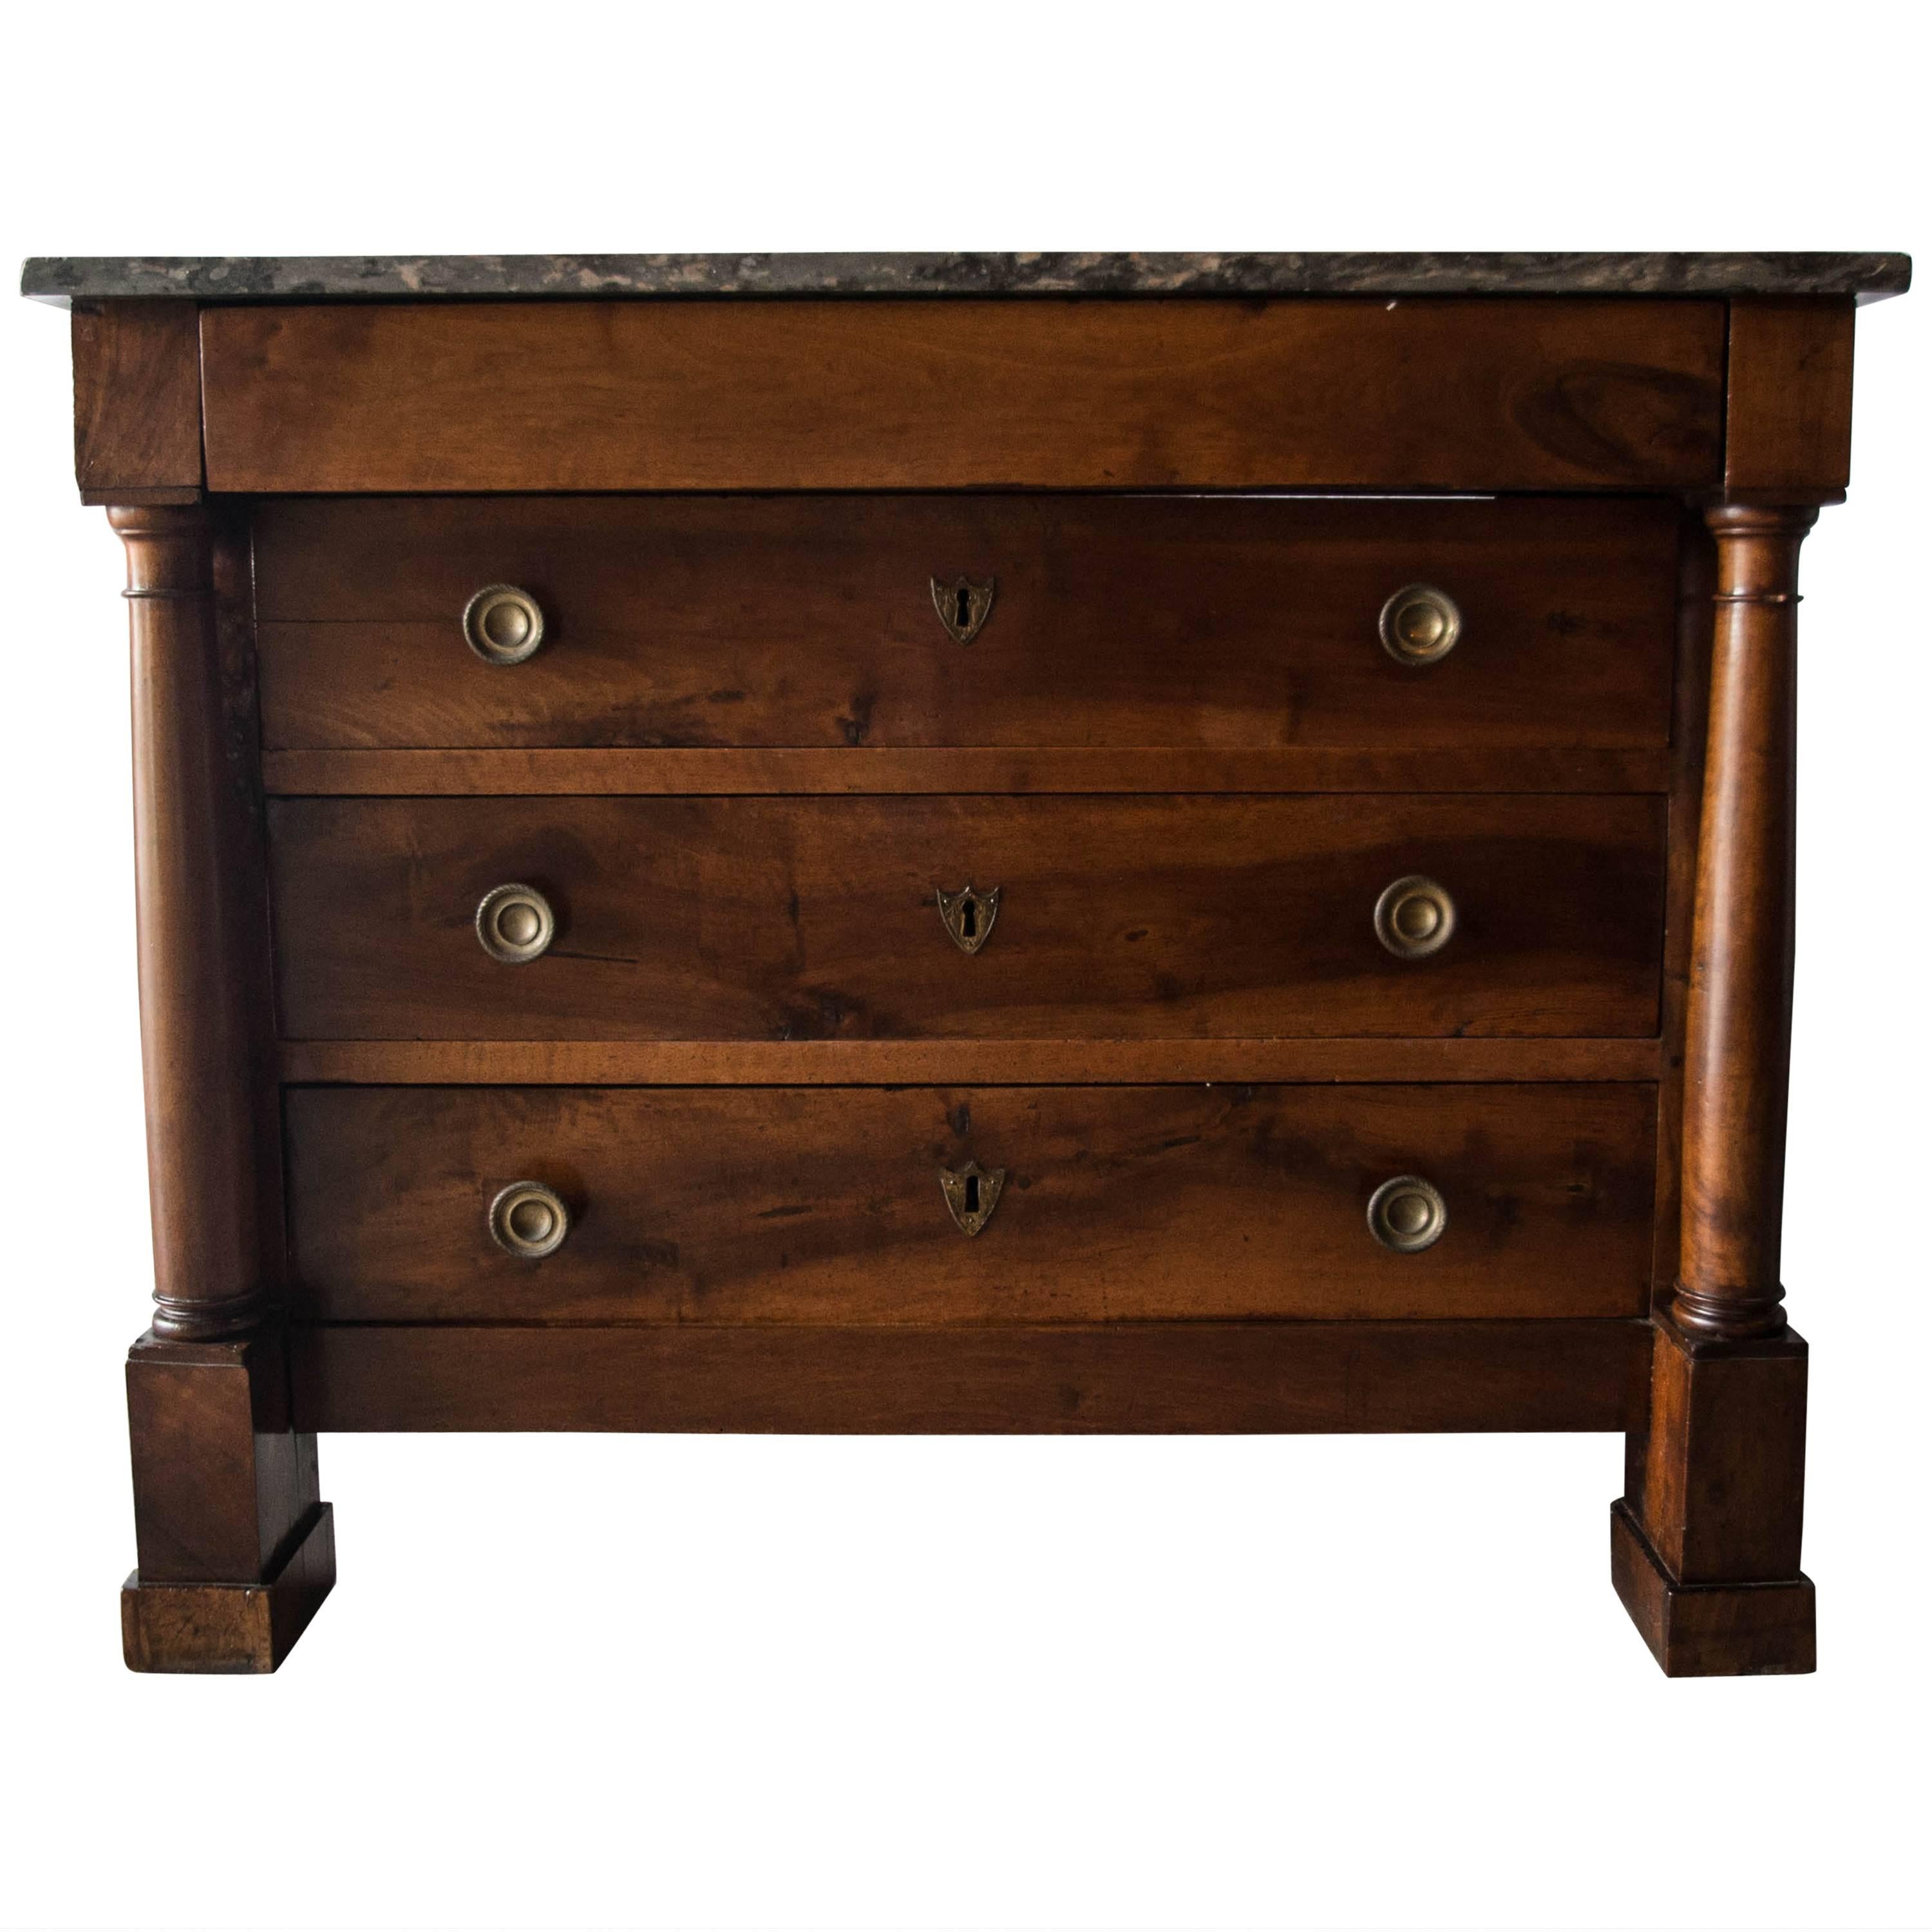 19th Century French Walnut Empire Commode with Marble Top